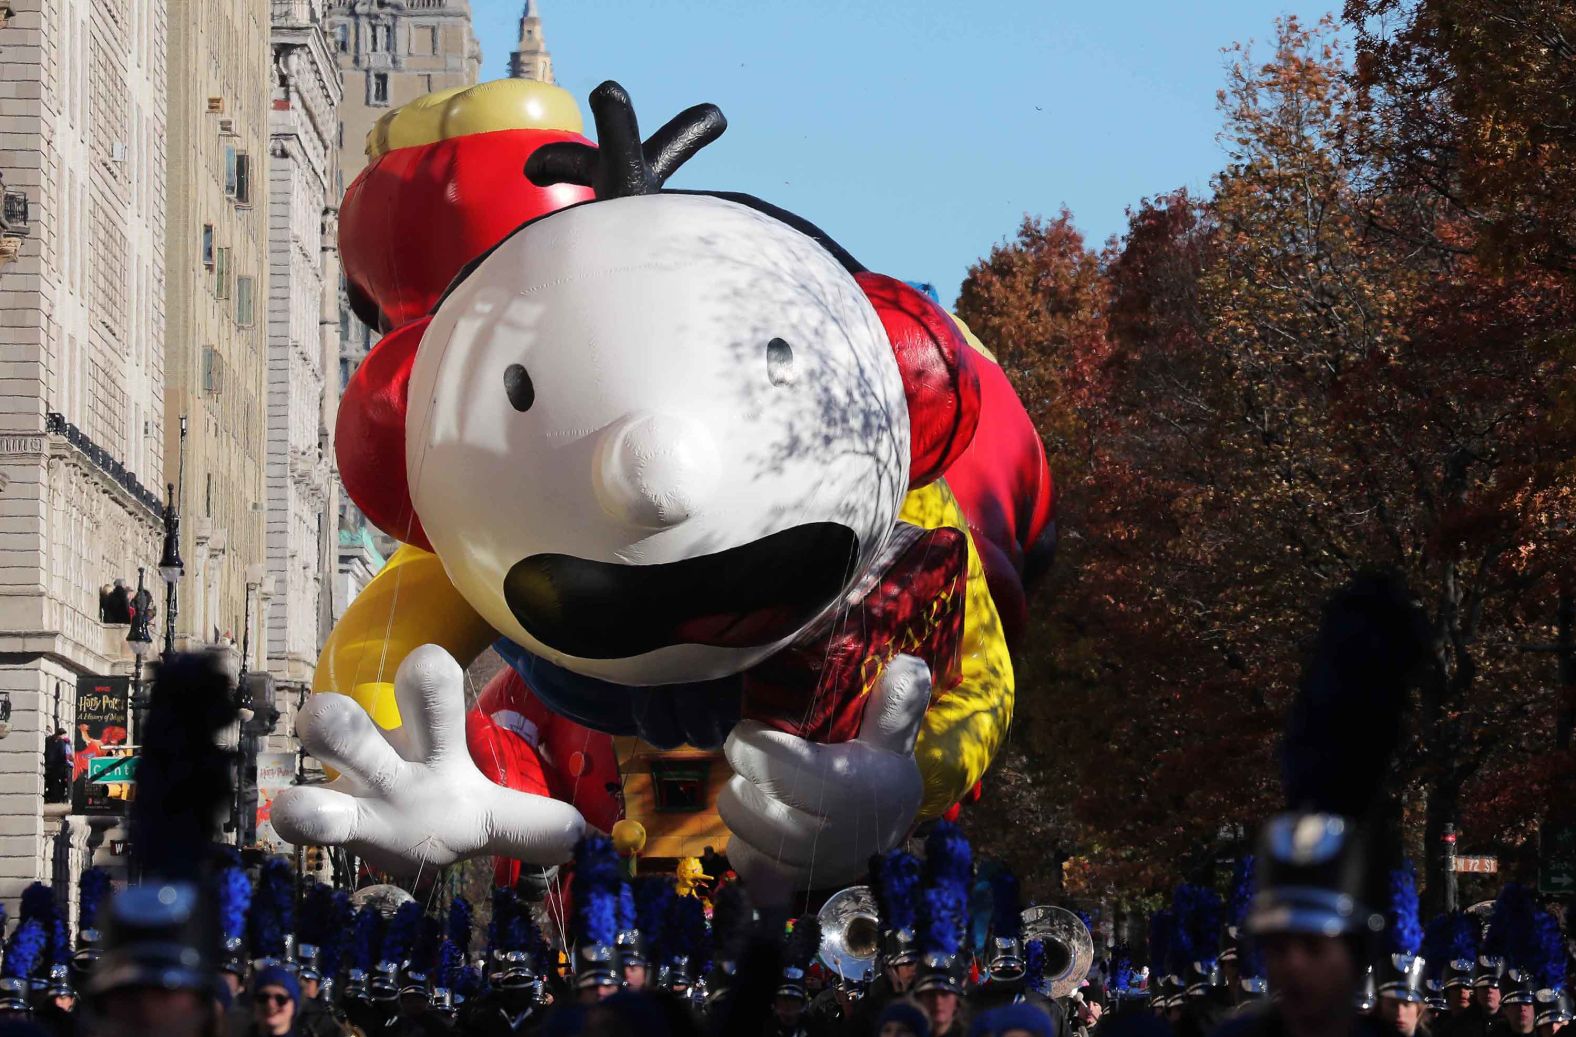 Some 3.5 million spectators were expected along the parade route in Manhattan.